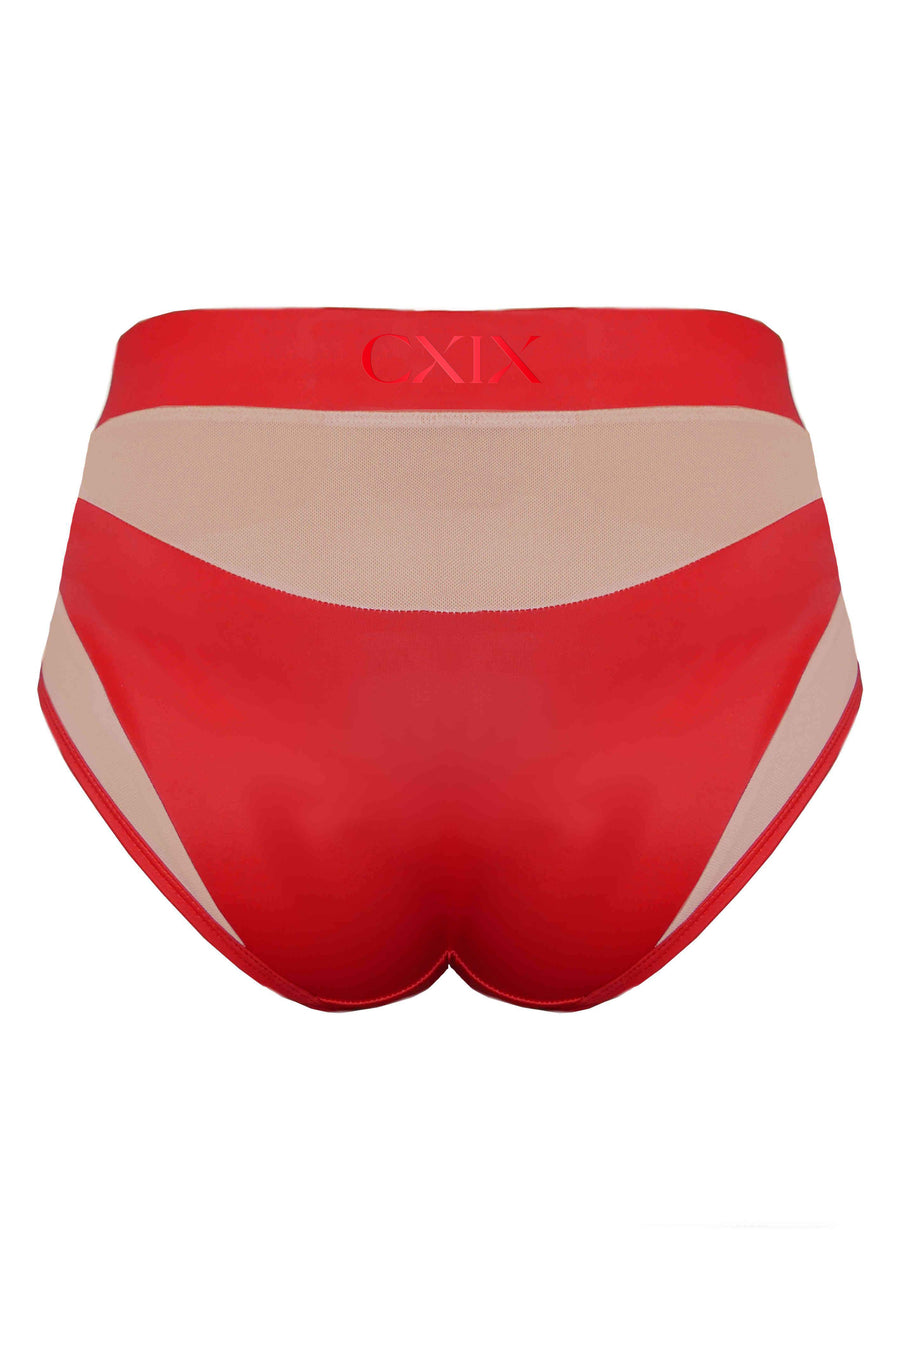 Goddess High Waisted Bottoms - Red with Sand Mesh